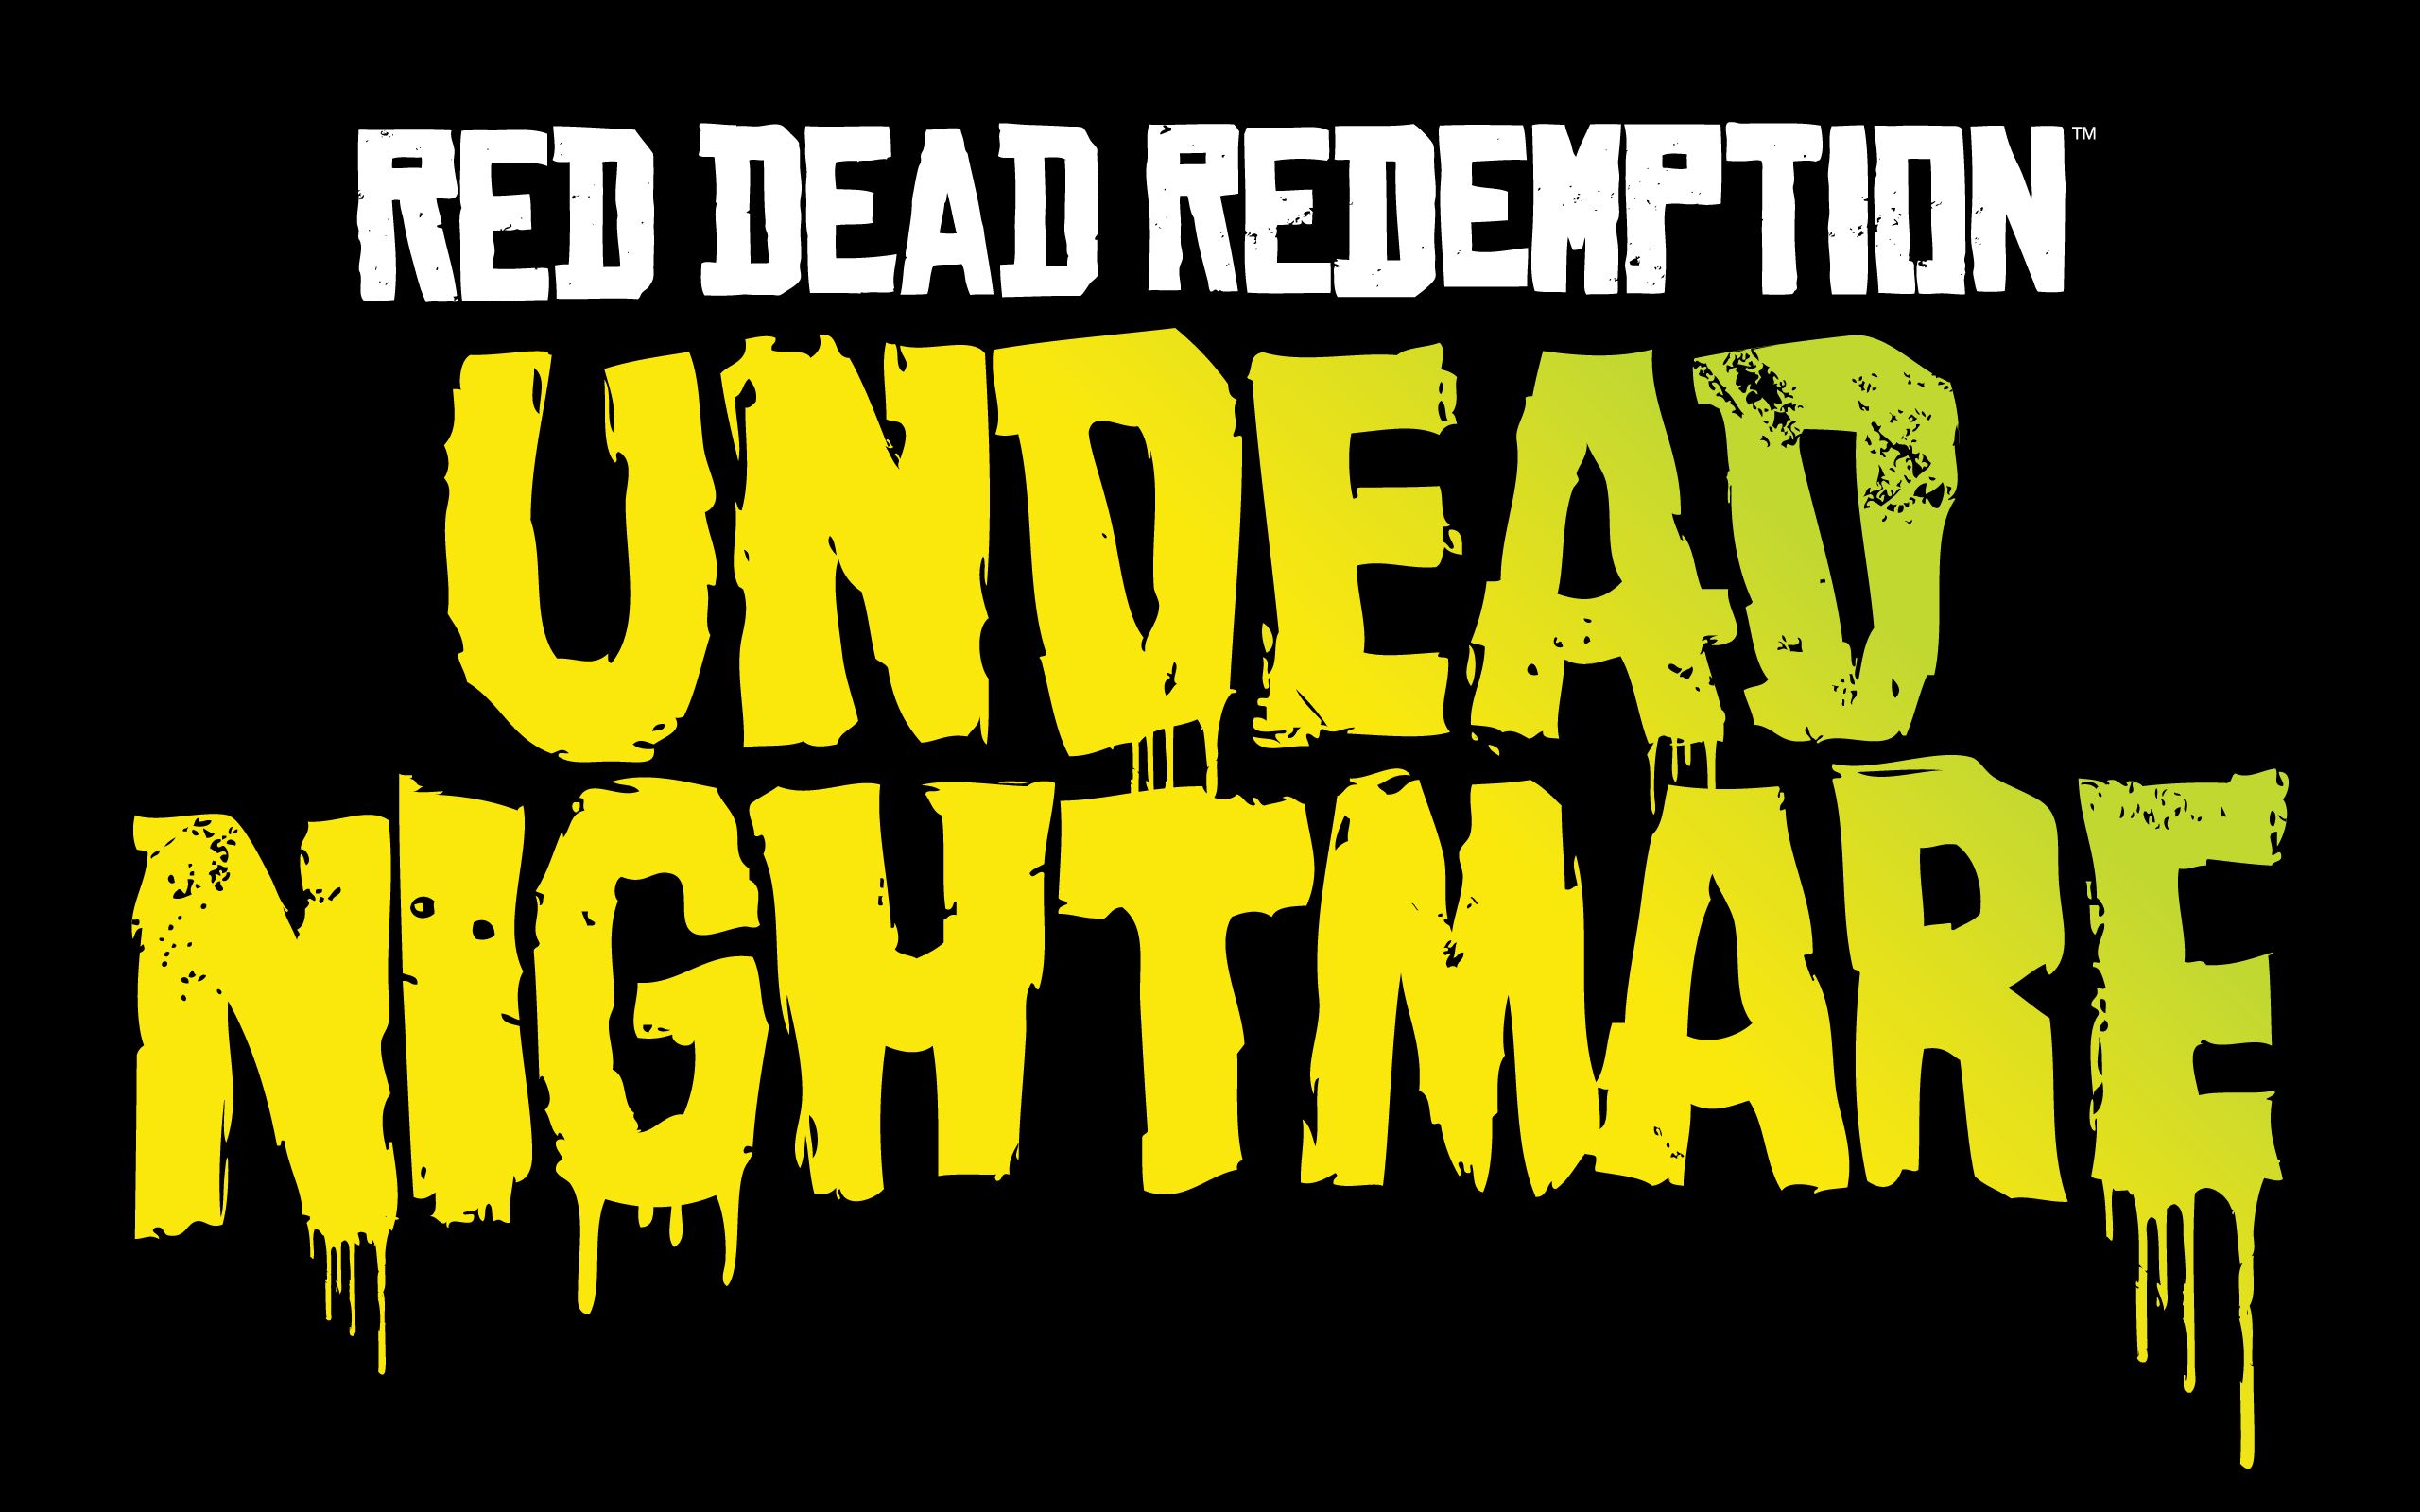 Red Dead Redemption: Undead Nightmare .mobygames.com